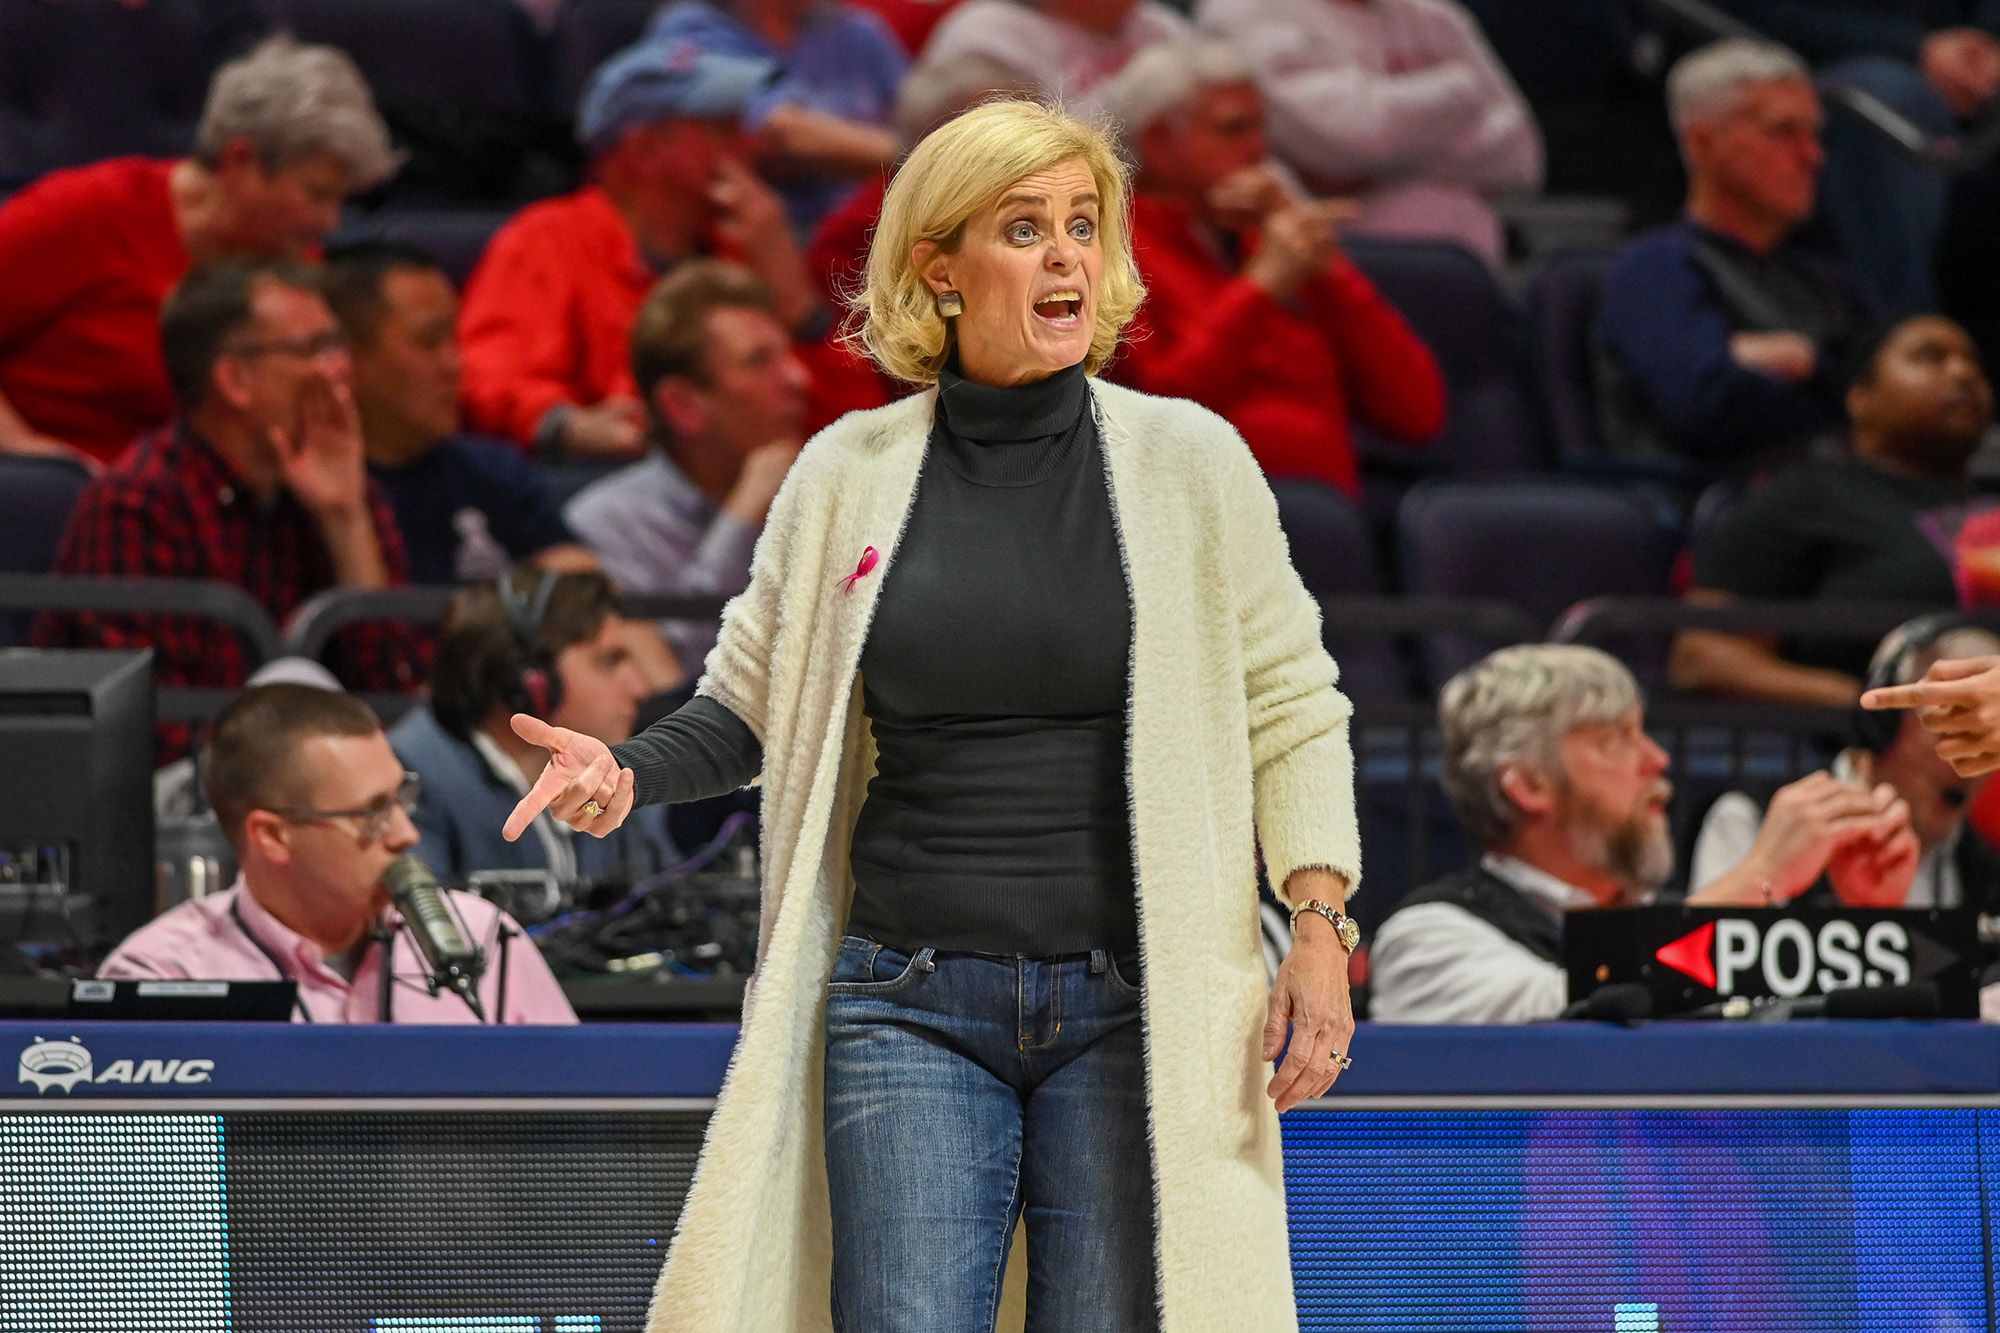 LSU's Kim Mulkey wins AP Coach of the Year for third time